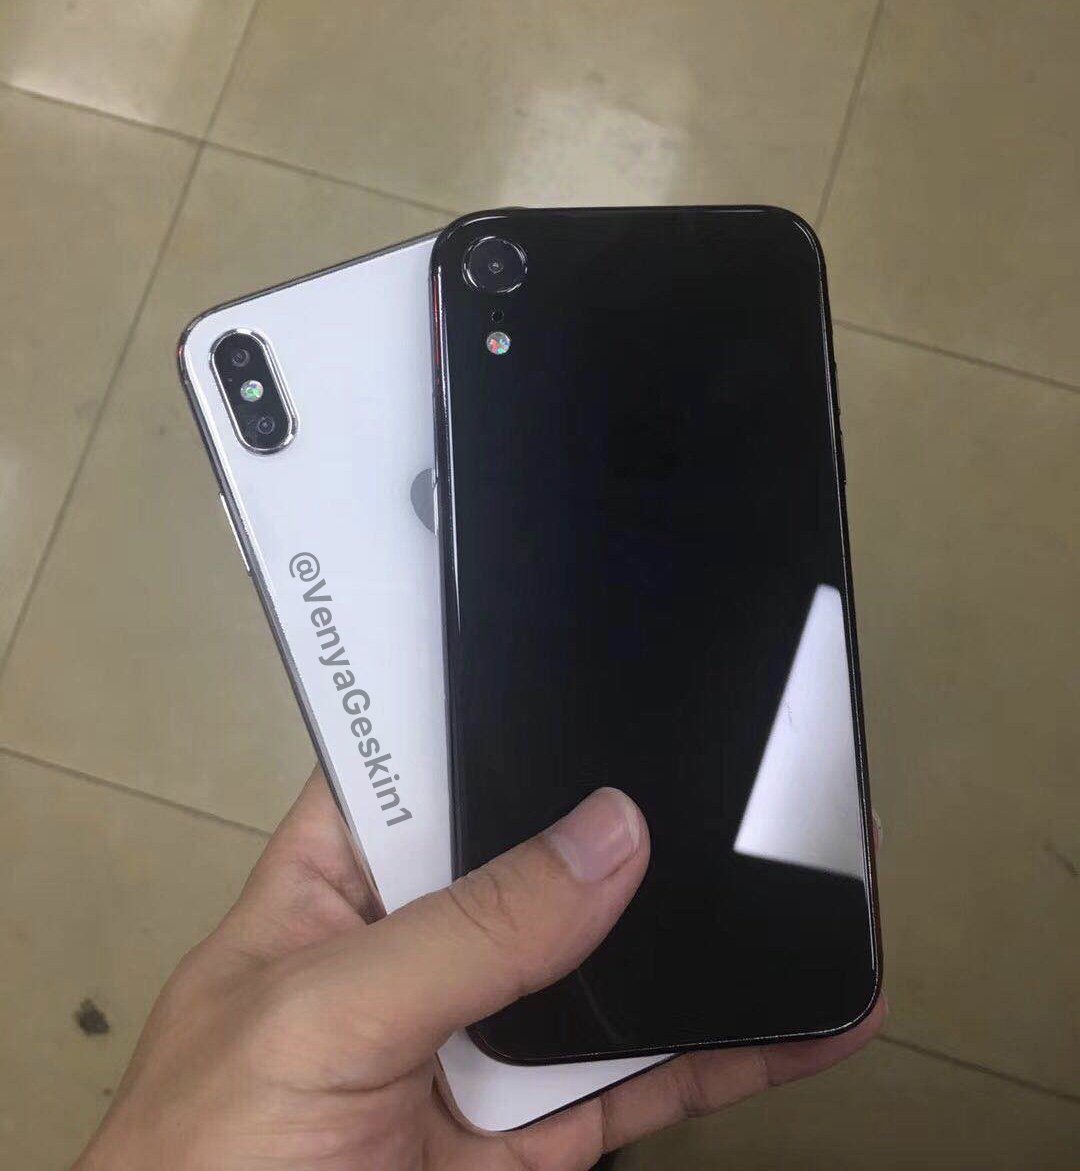 Dummy Models Purportedly Reveal Design of New 6.1-inch and 6.5-inch iPhones [Photos]